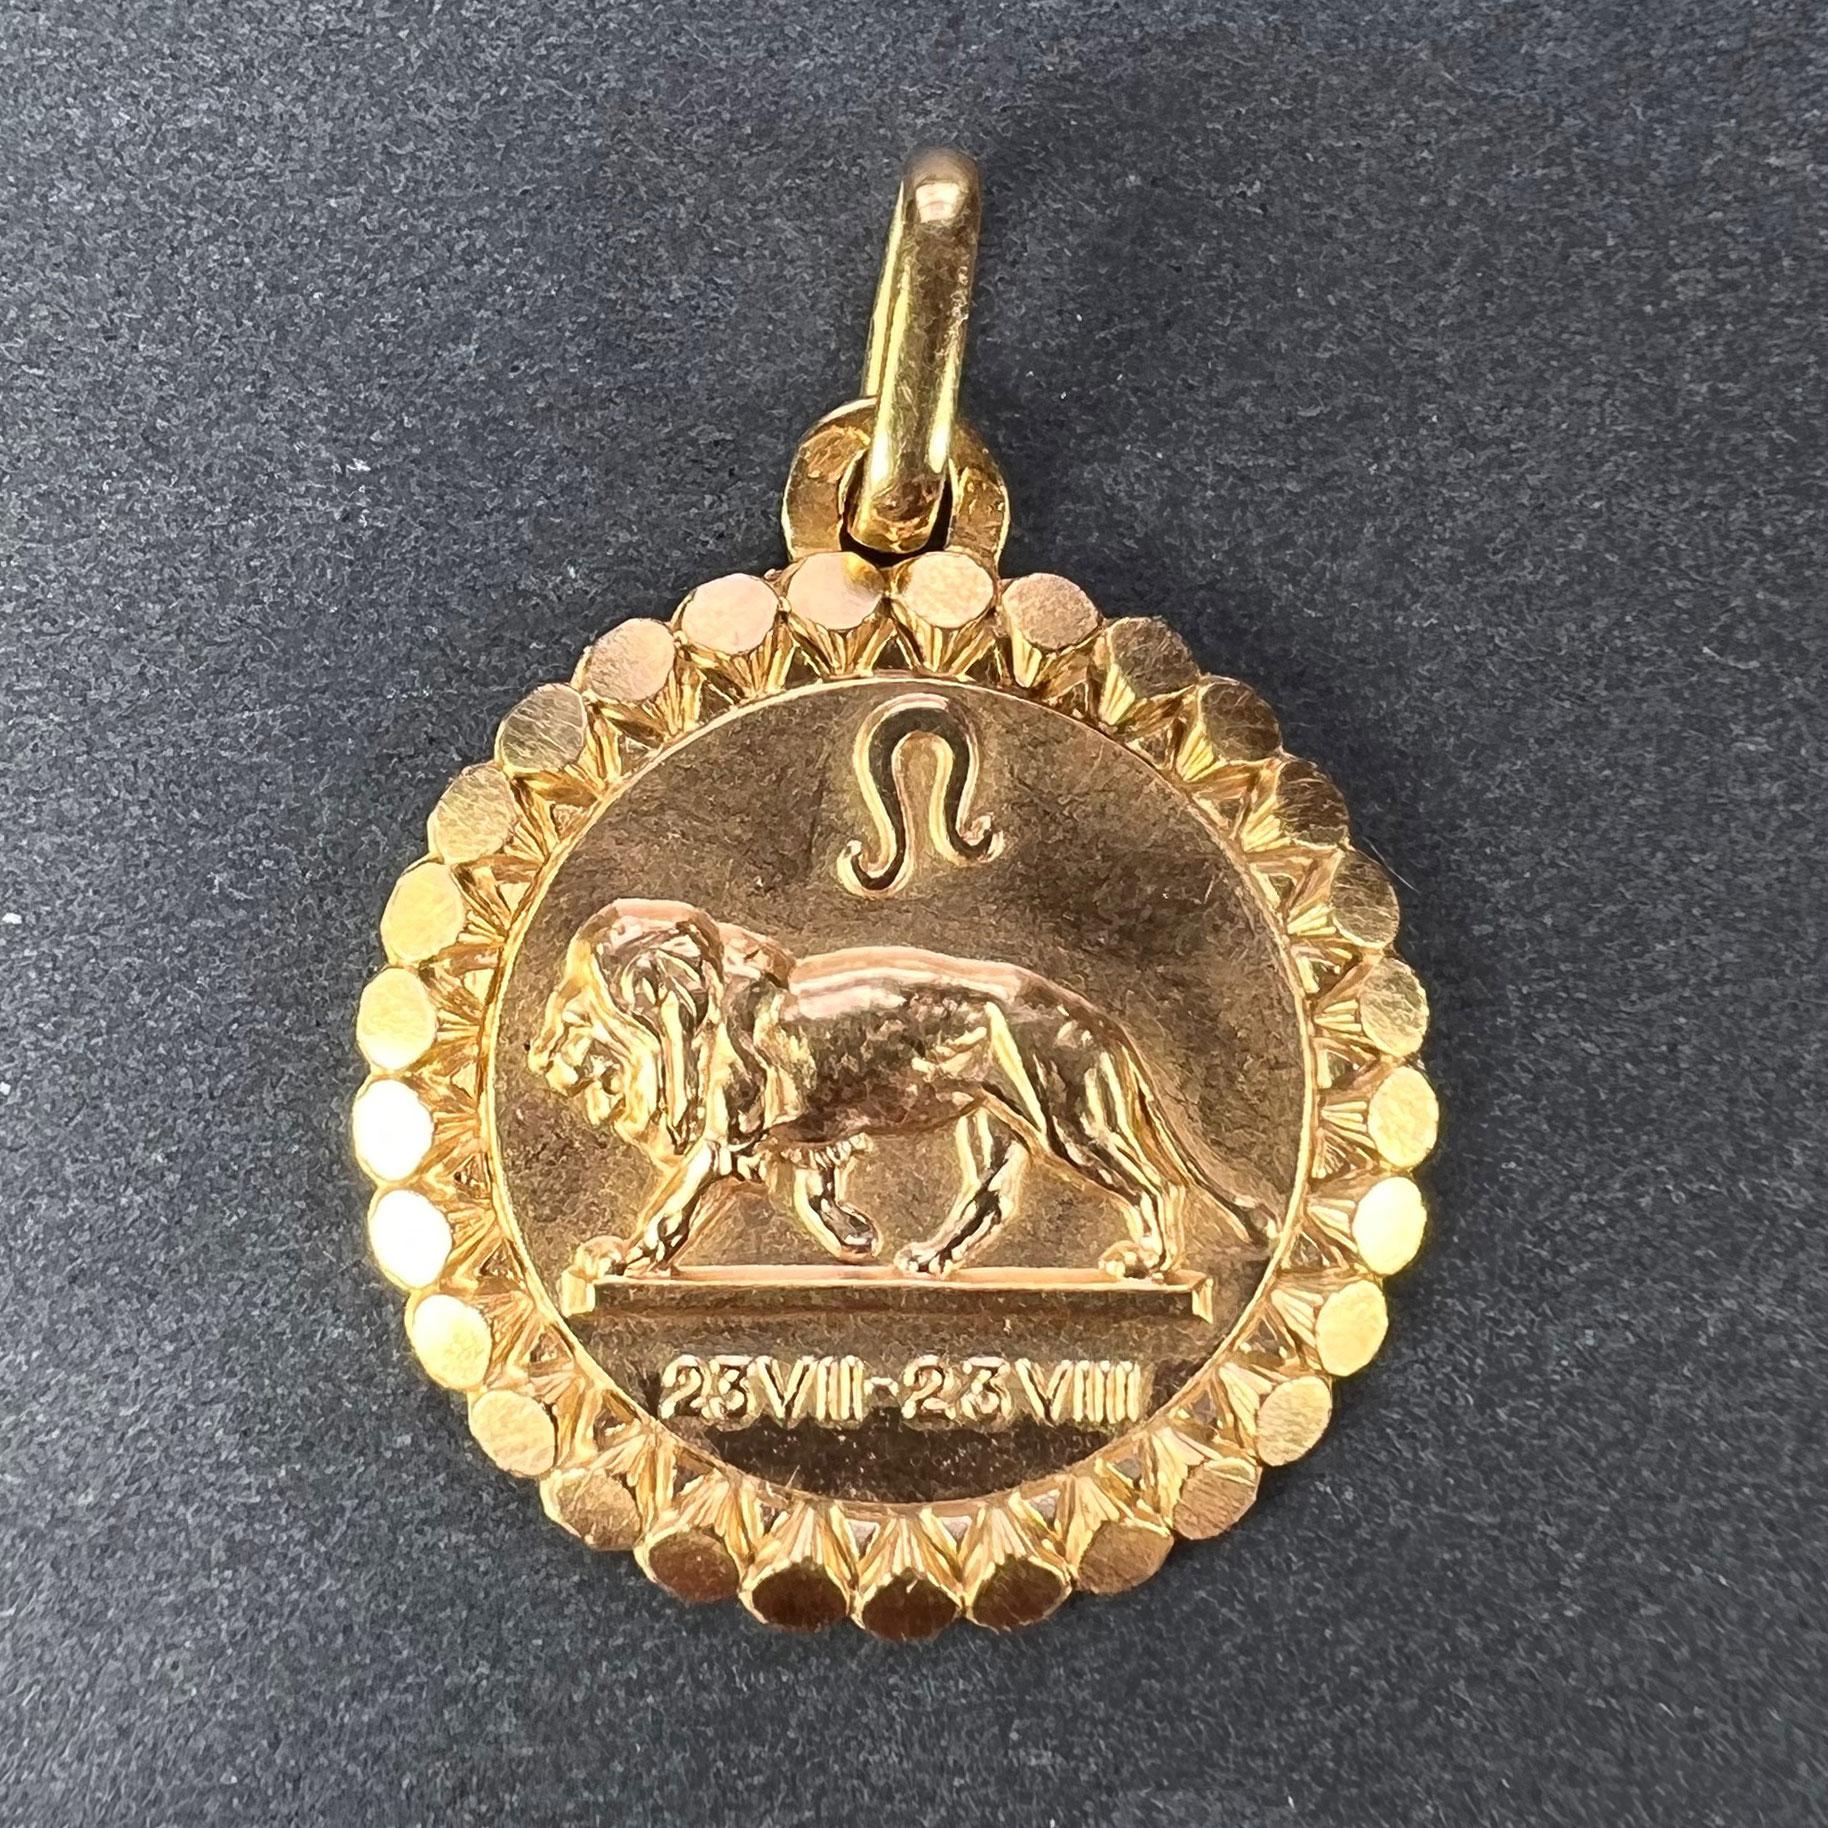 An 18 karat (18K) yellow gold charm pendant designed as the Zodiac sign of Leo, depicting a lion with the dates 23 VII (July) and 23 VIII (August). Stamped with the eagle mark for 18 karat gold and French manufacture with makers mark for Perroud.
